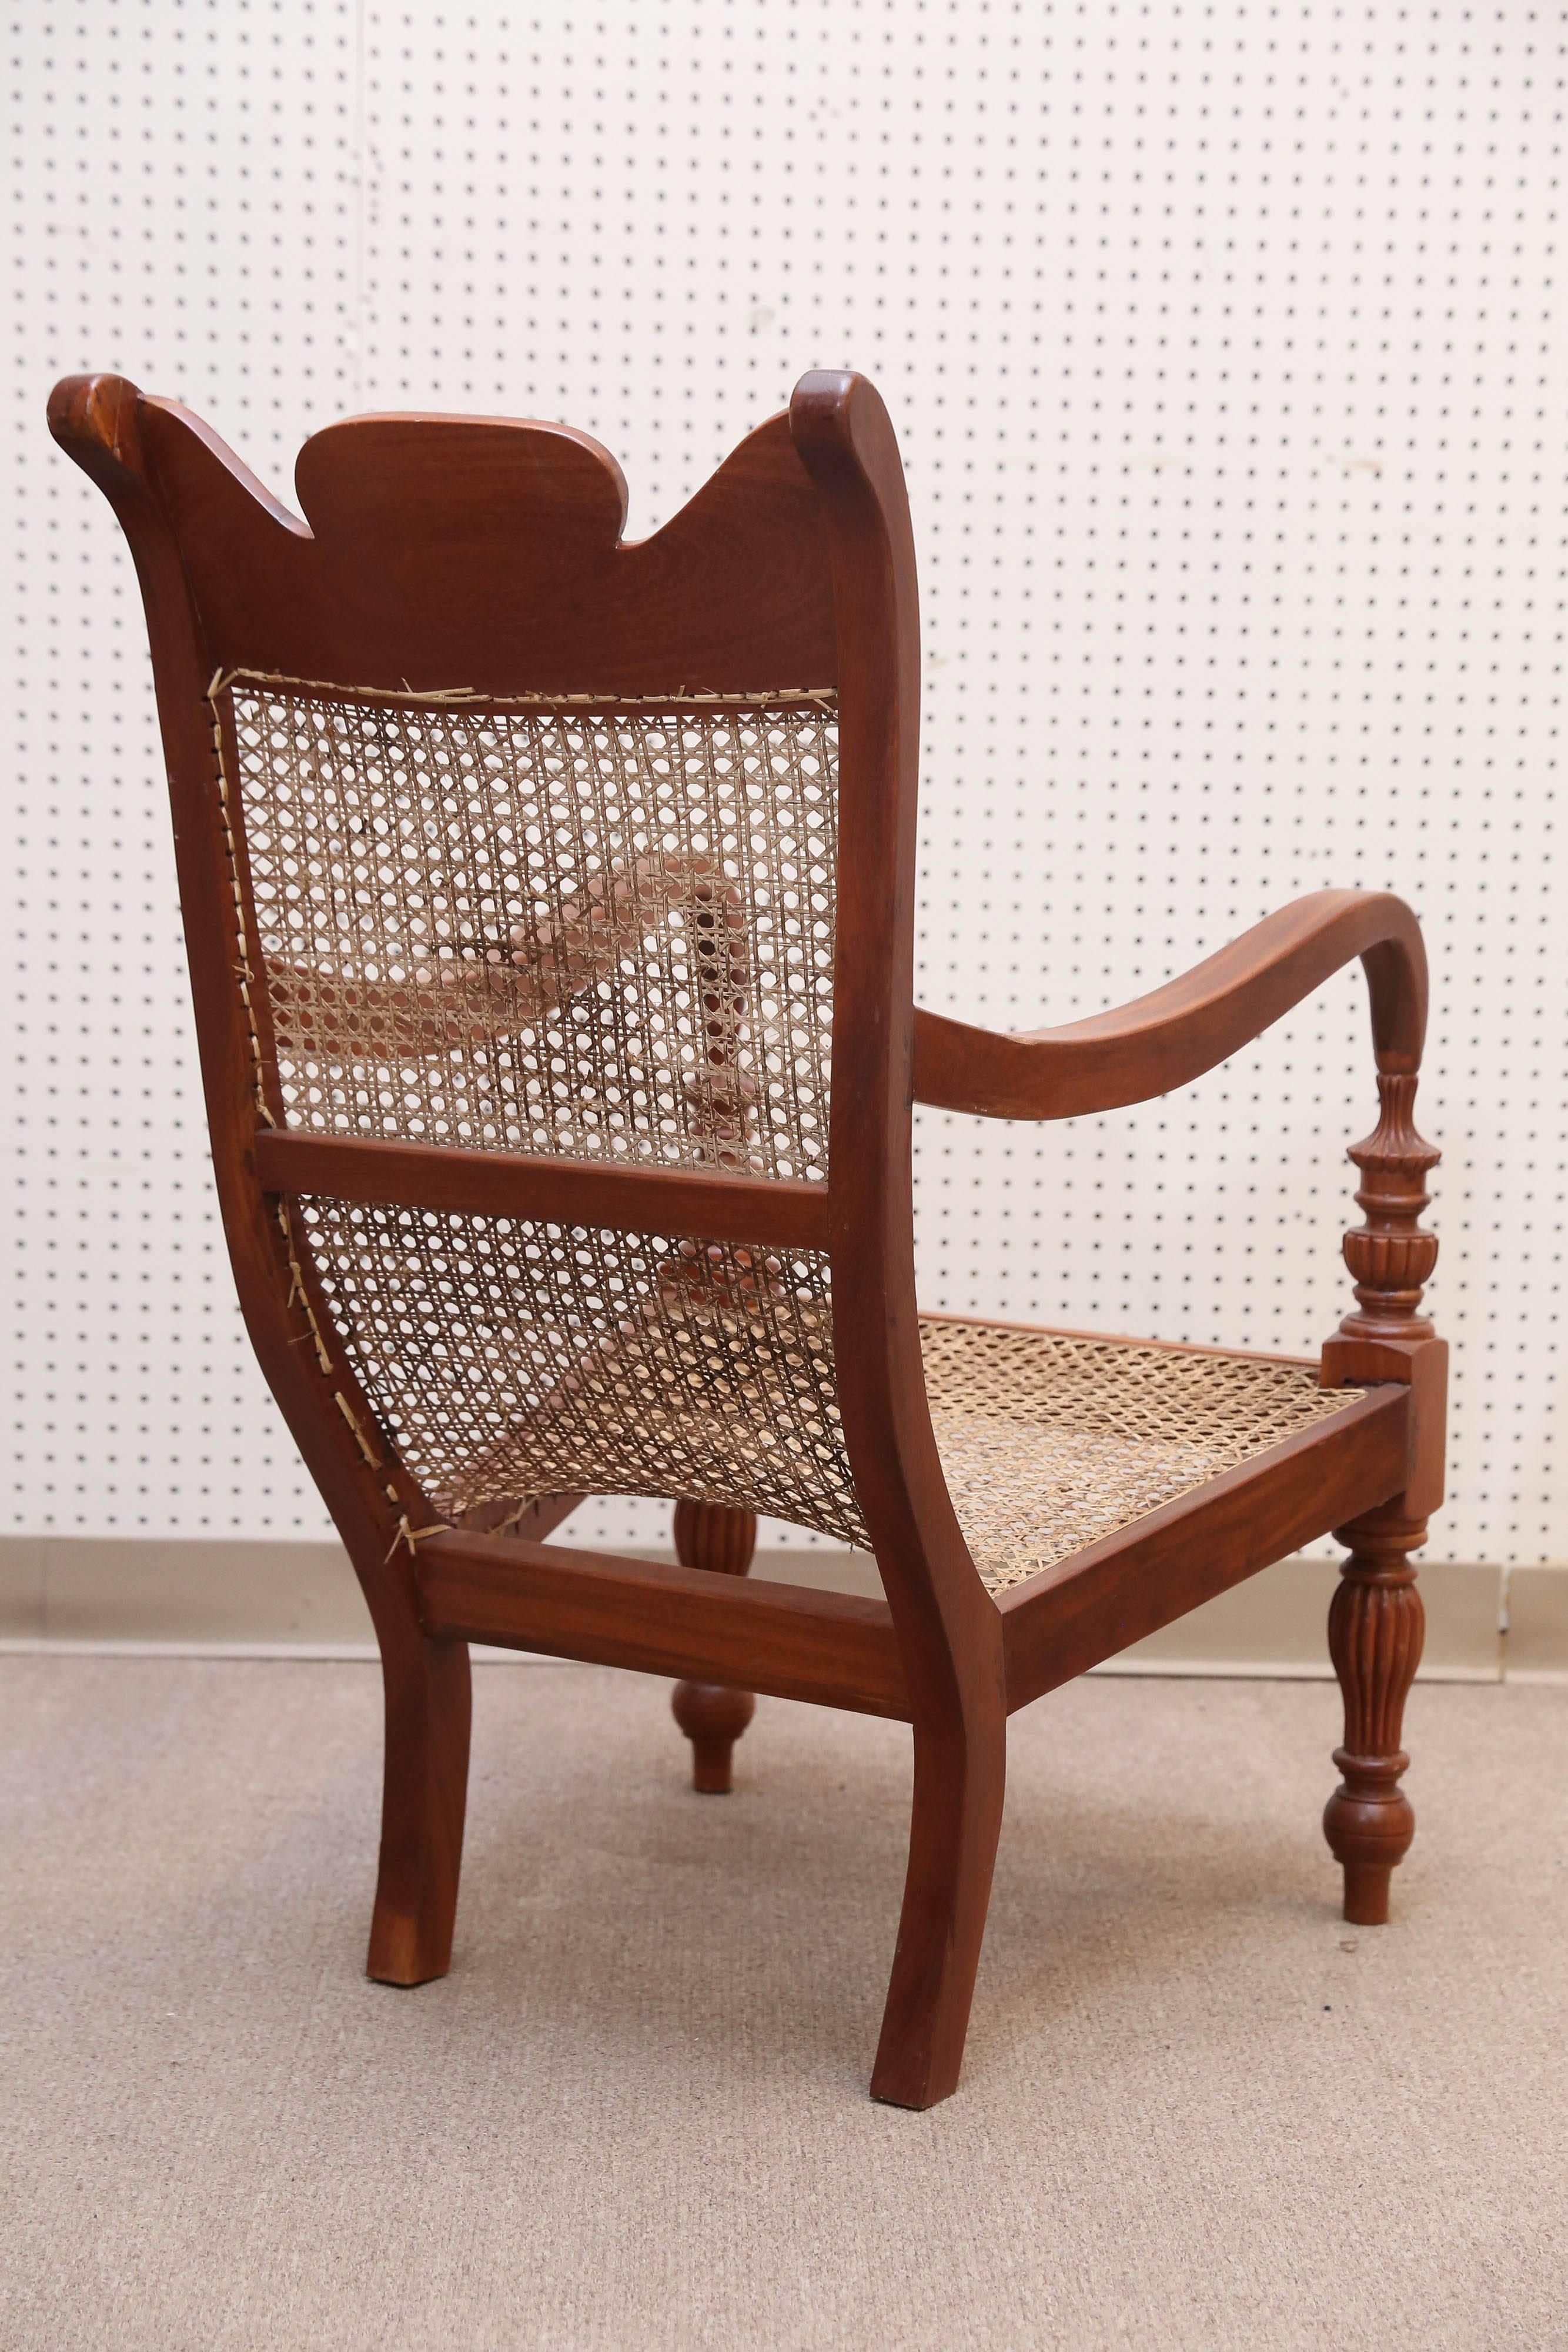 cane chairs for sale in sri lanka